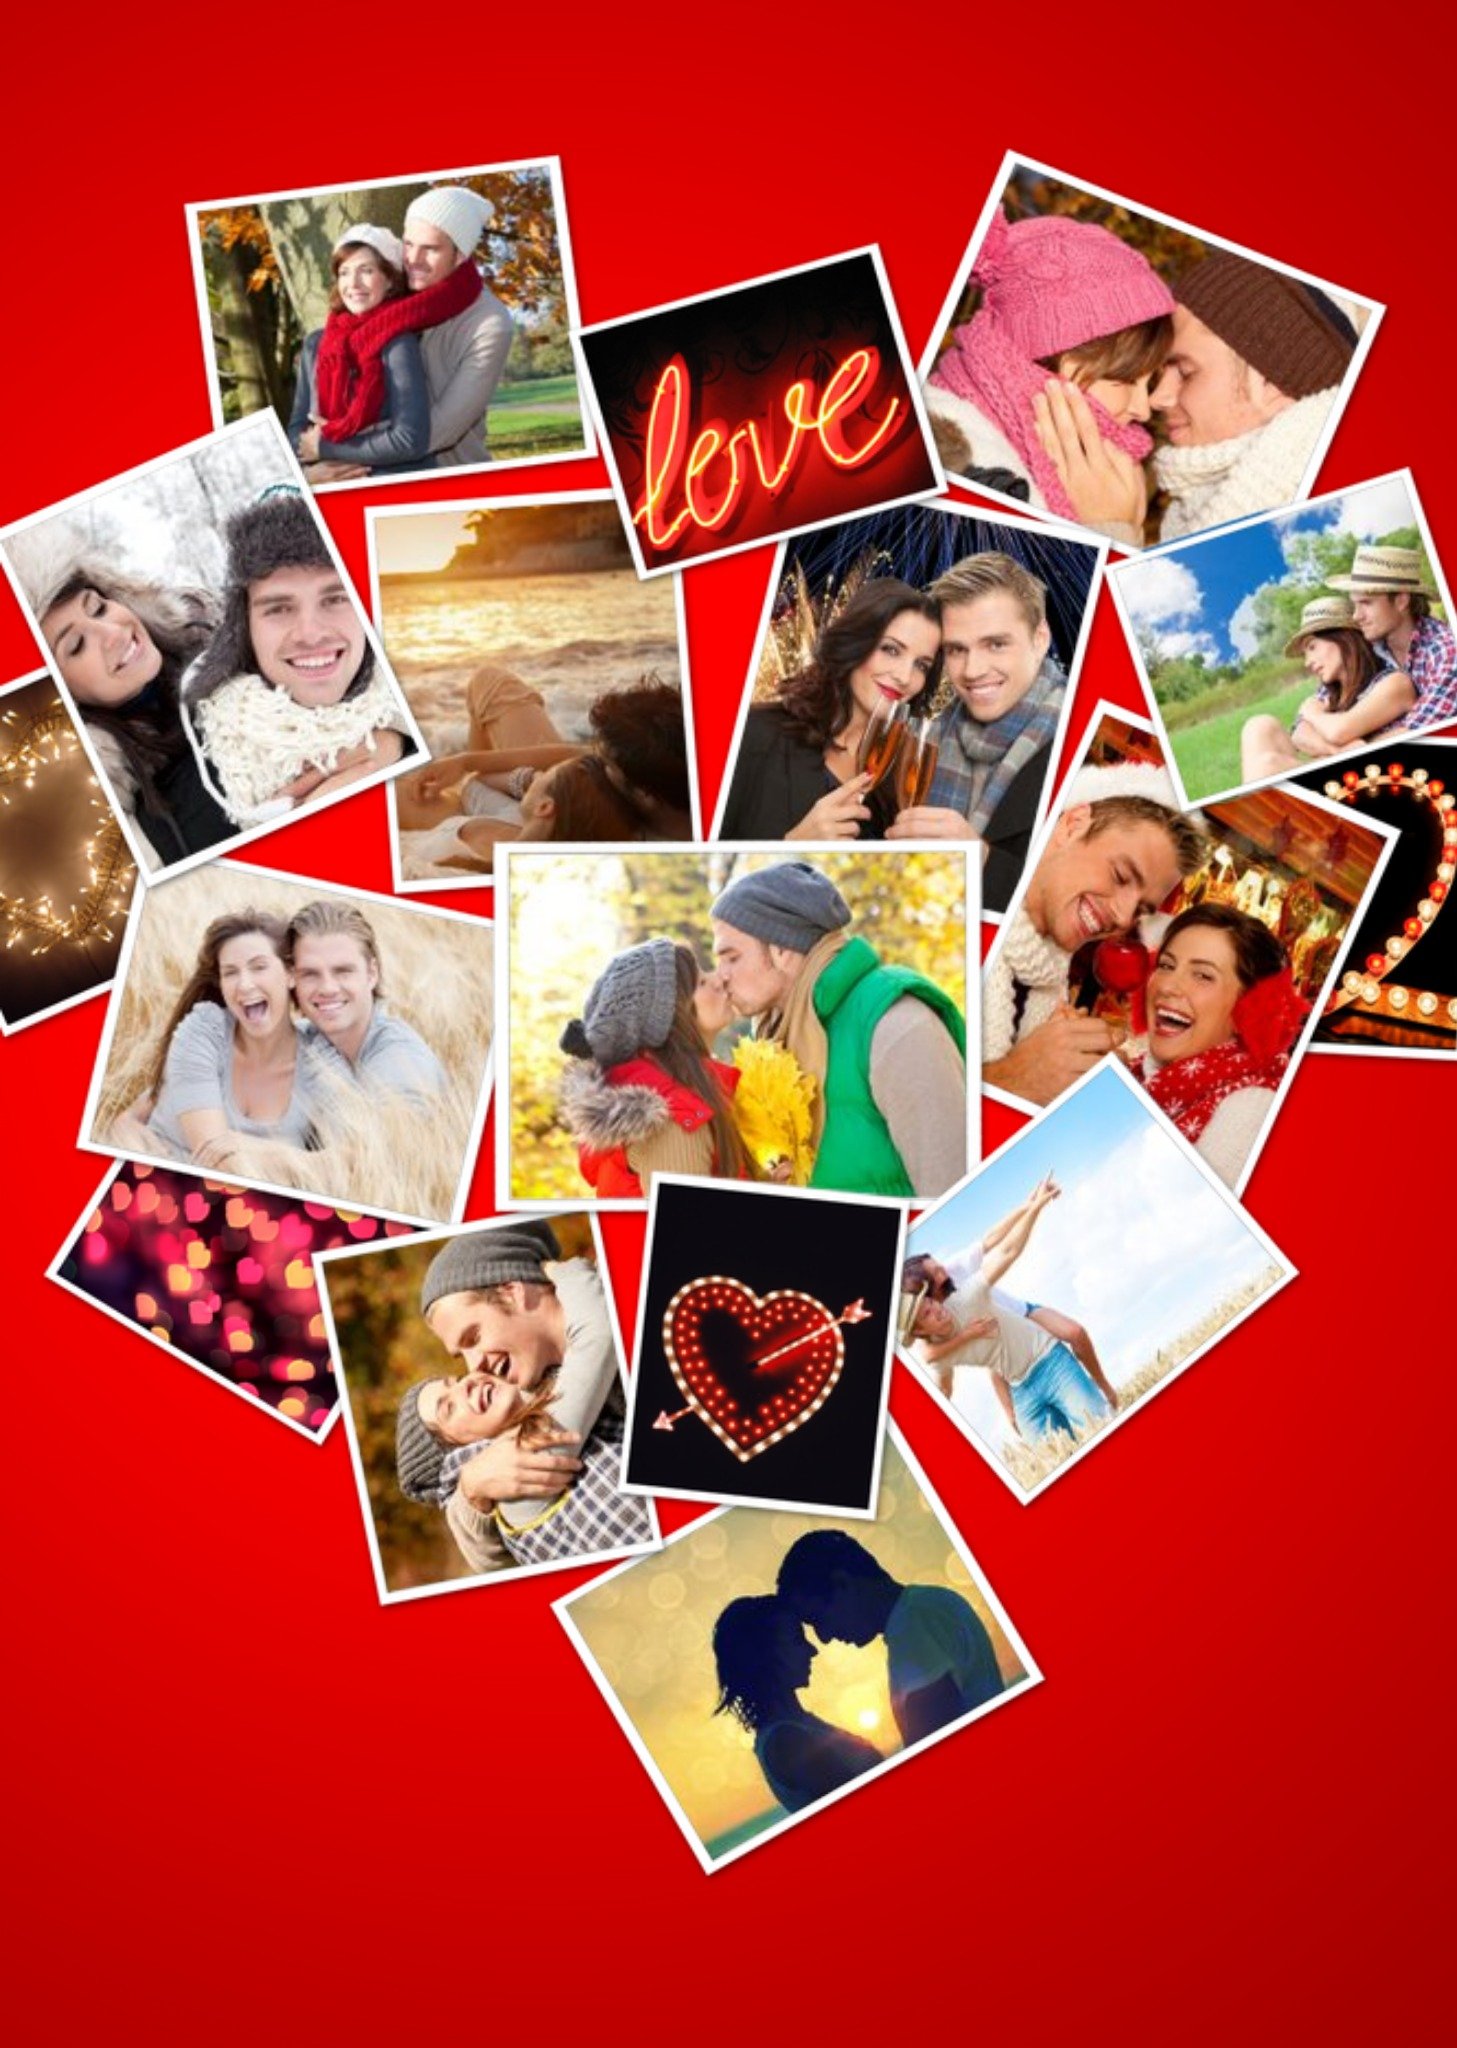 Moonpig Photo Heart Valentine's Card - Use Your Own Photos To Create This Heart Shaped Valentine's D